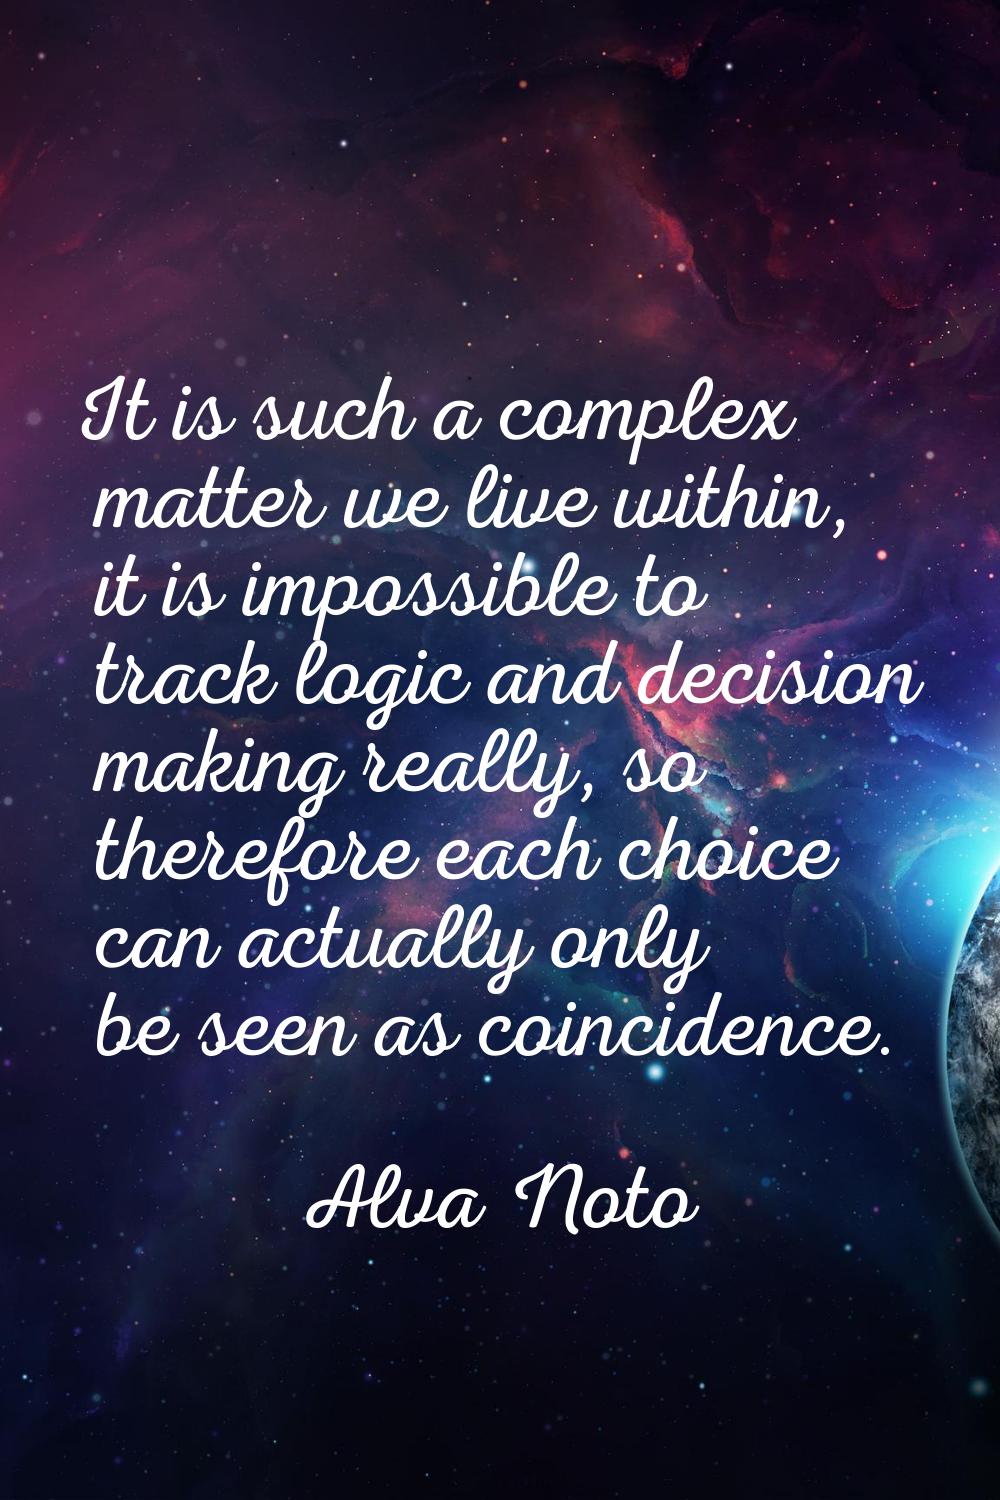 It is such a complex matter we live within, it is impossible to track logic and decision making rea